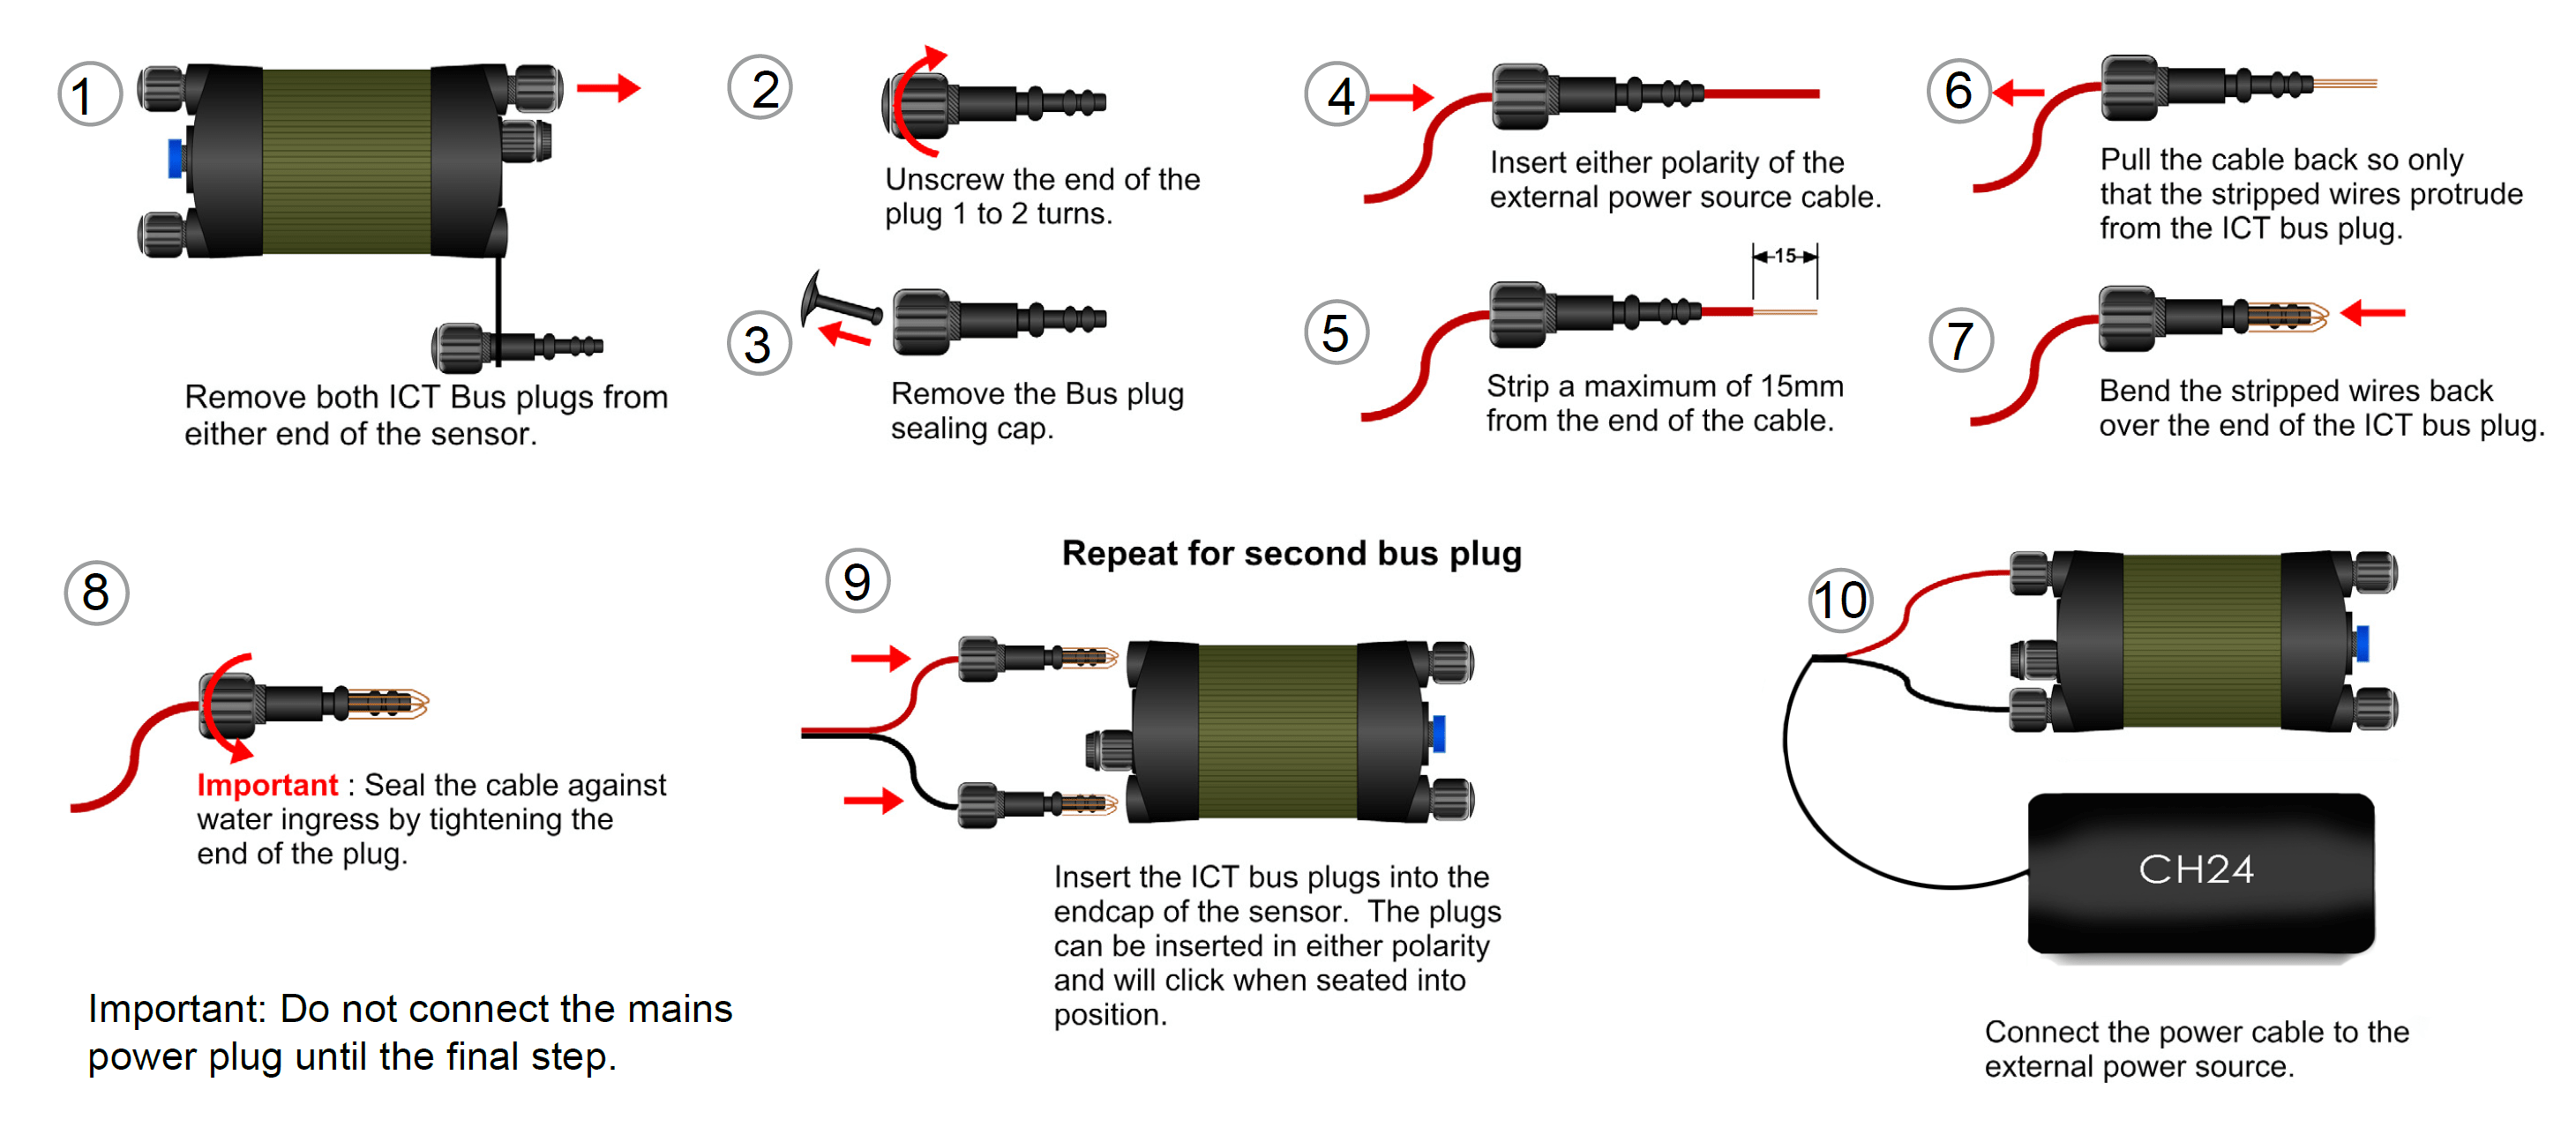 CH24 instructions for connection to instruments